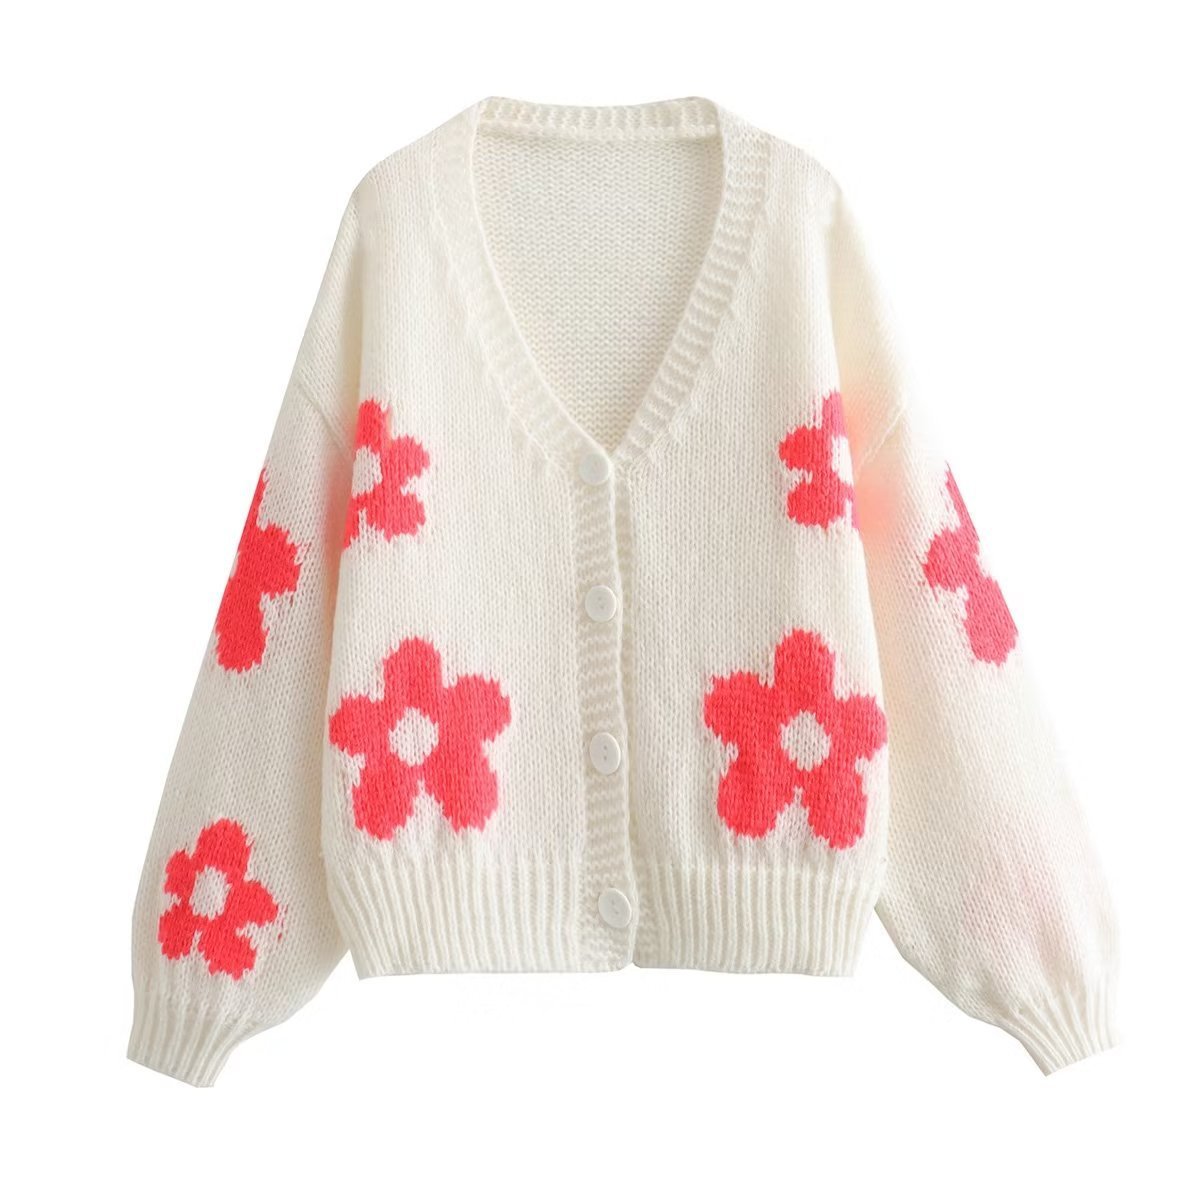 Three-dimensional Mosaic Idle Style Knitted Coat